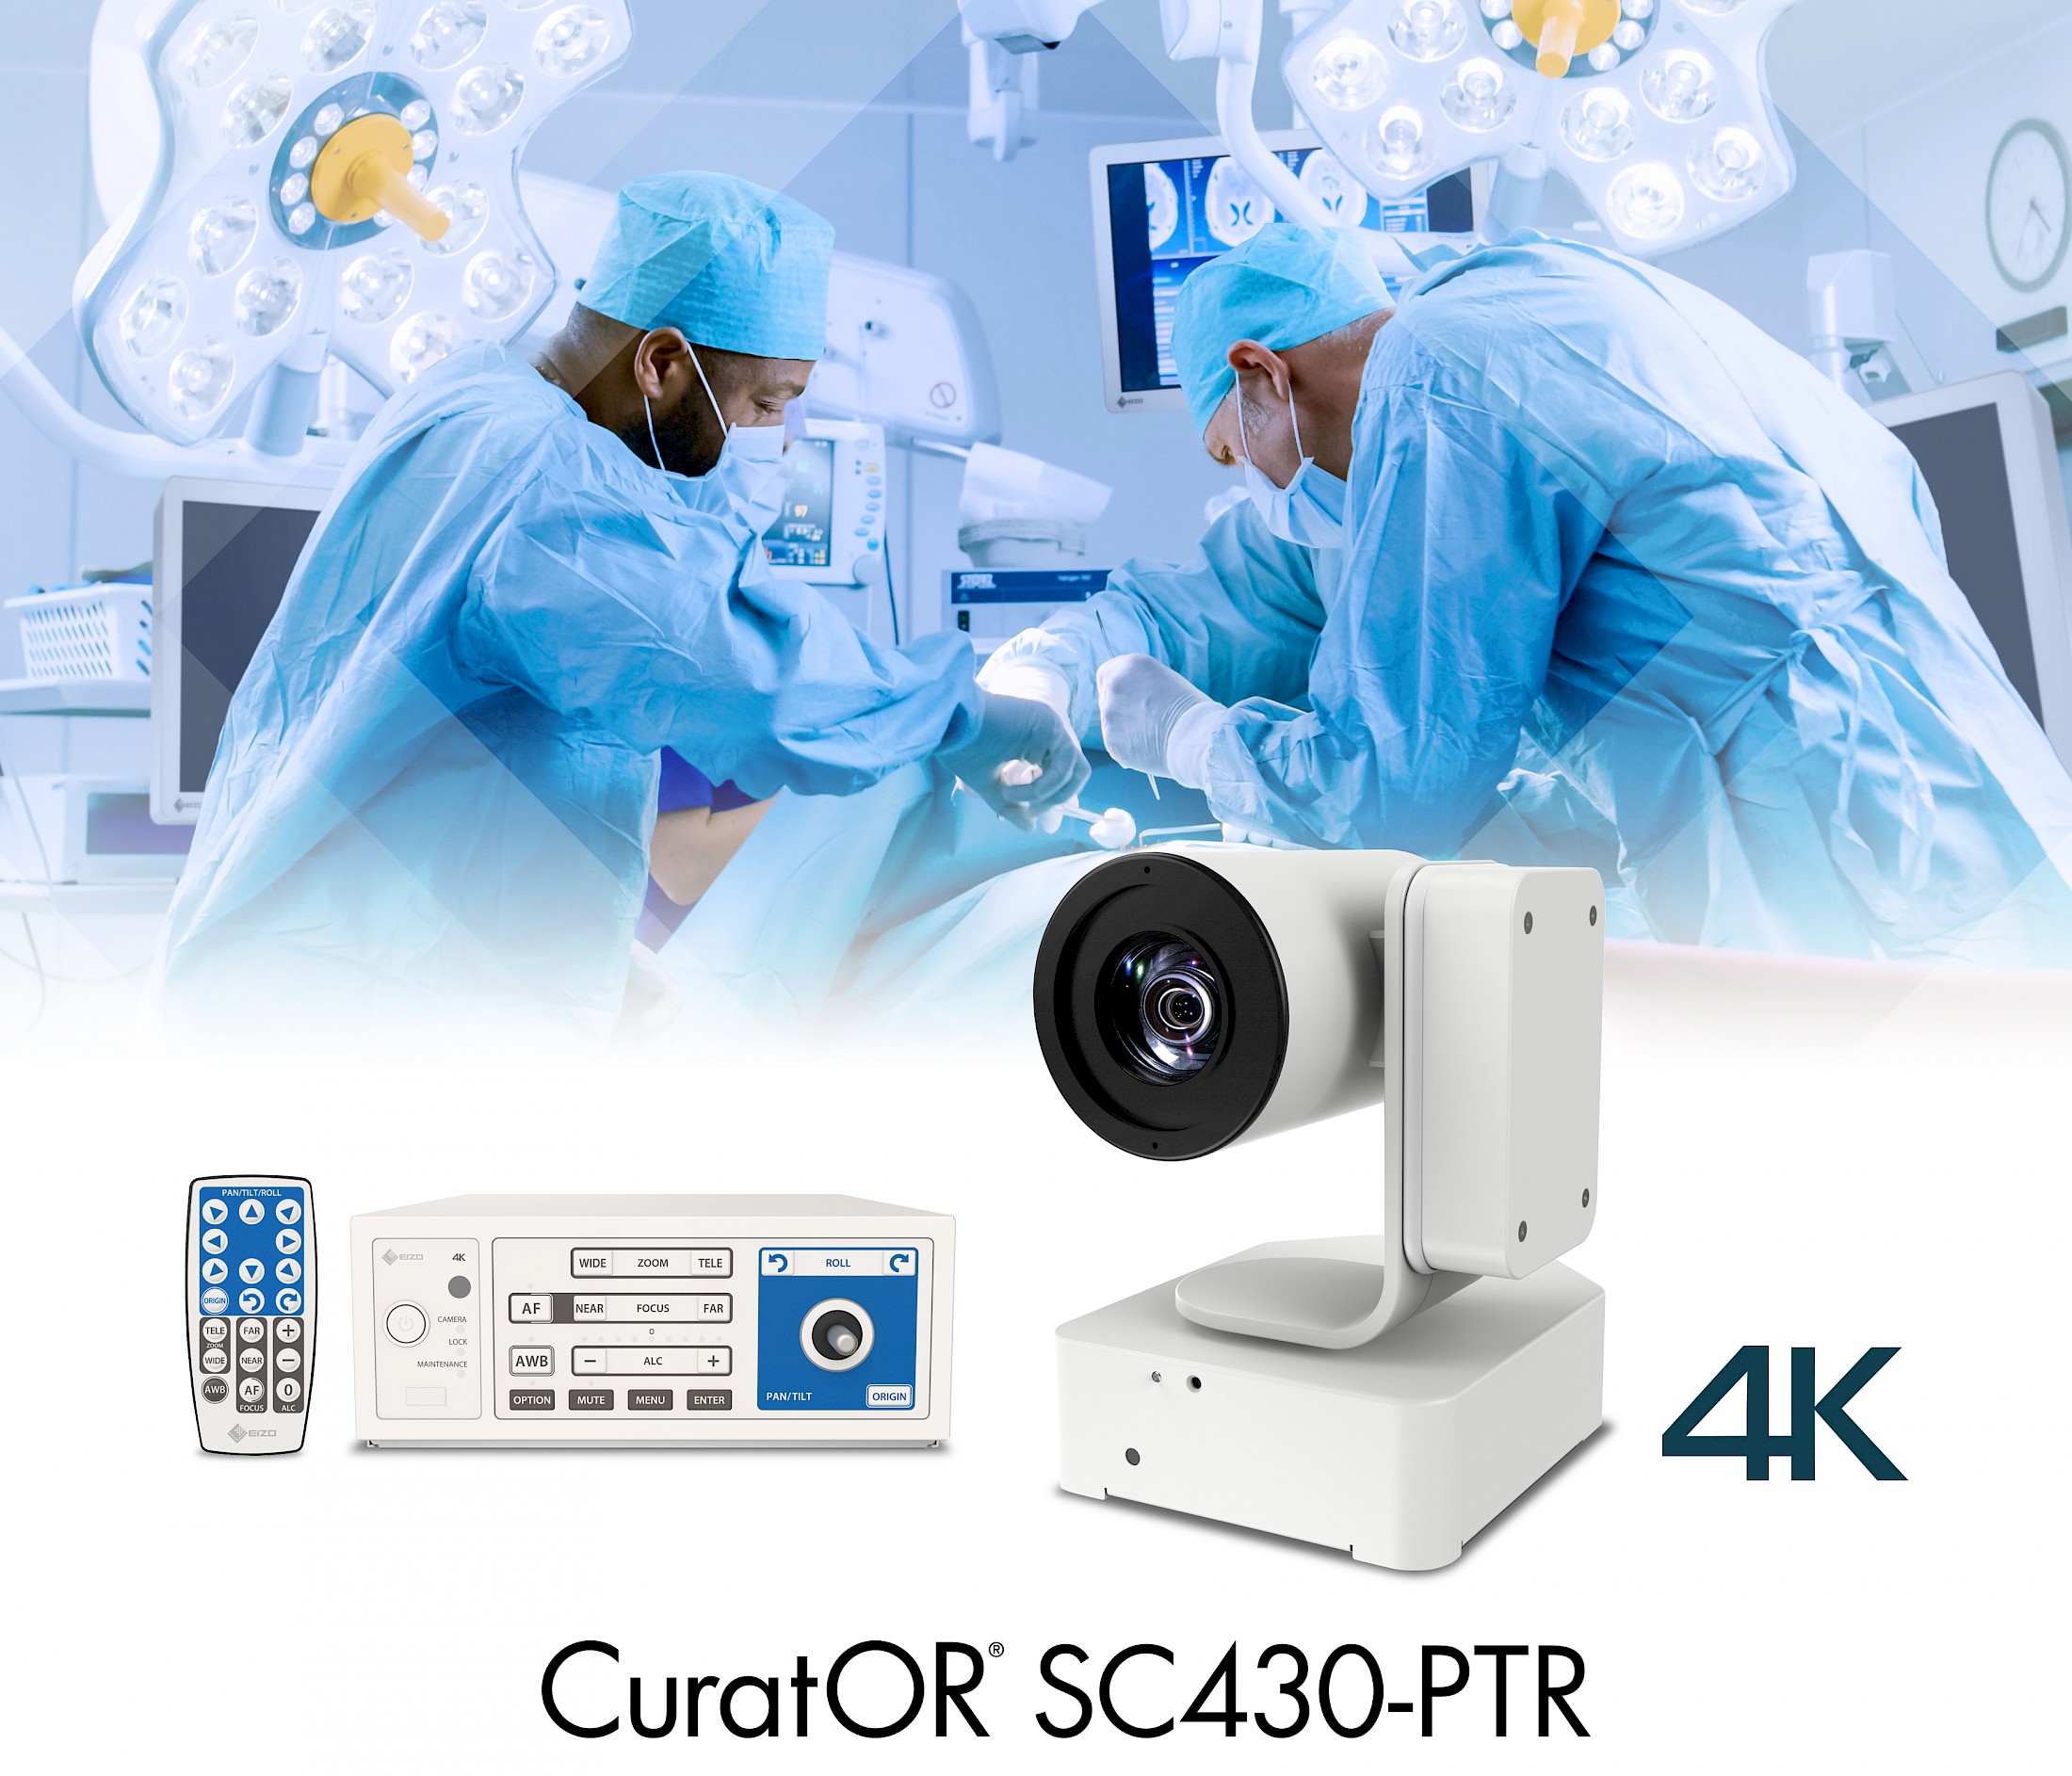 EIZO Releases Its First Surgical Field Camera with 4K Resolution and Fully Integrated Triaxial Mount